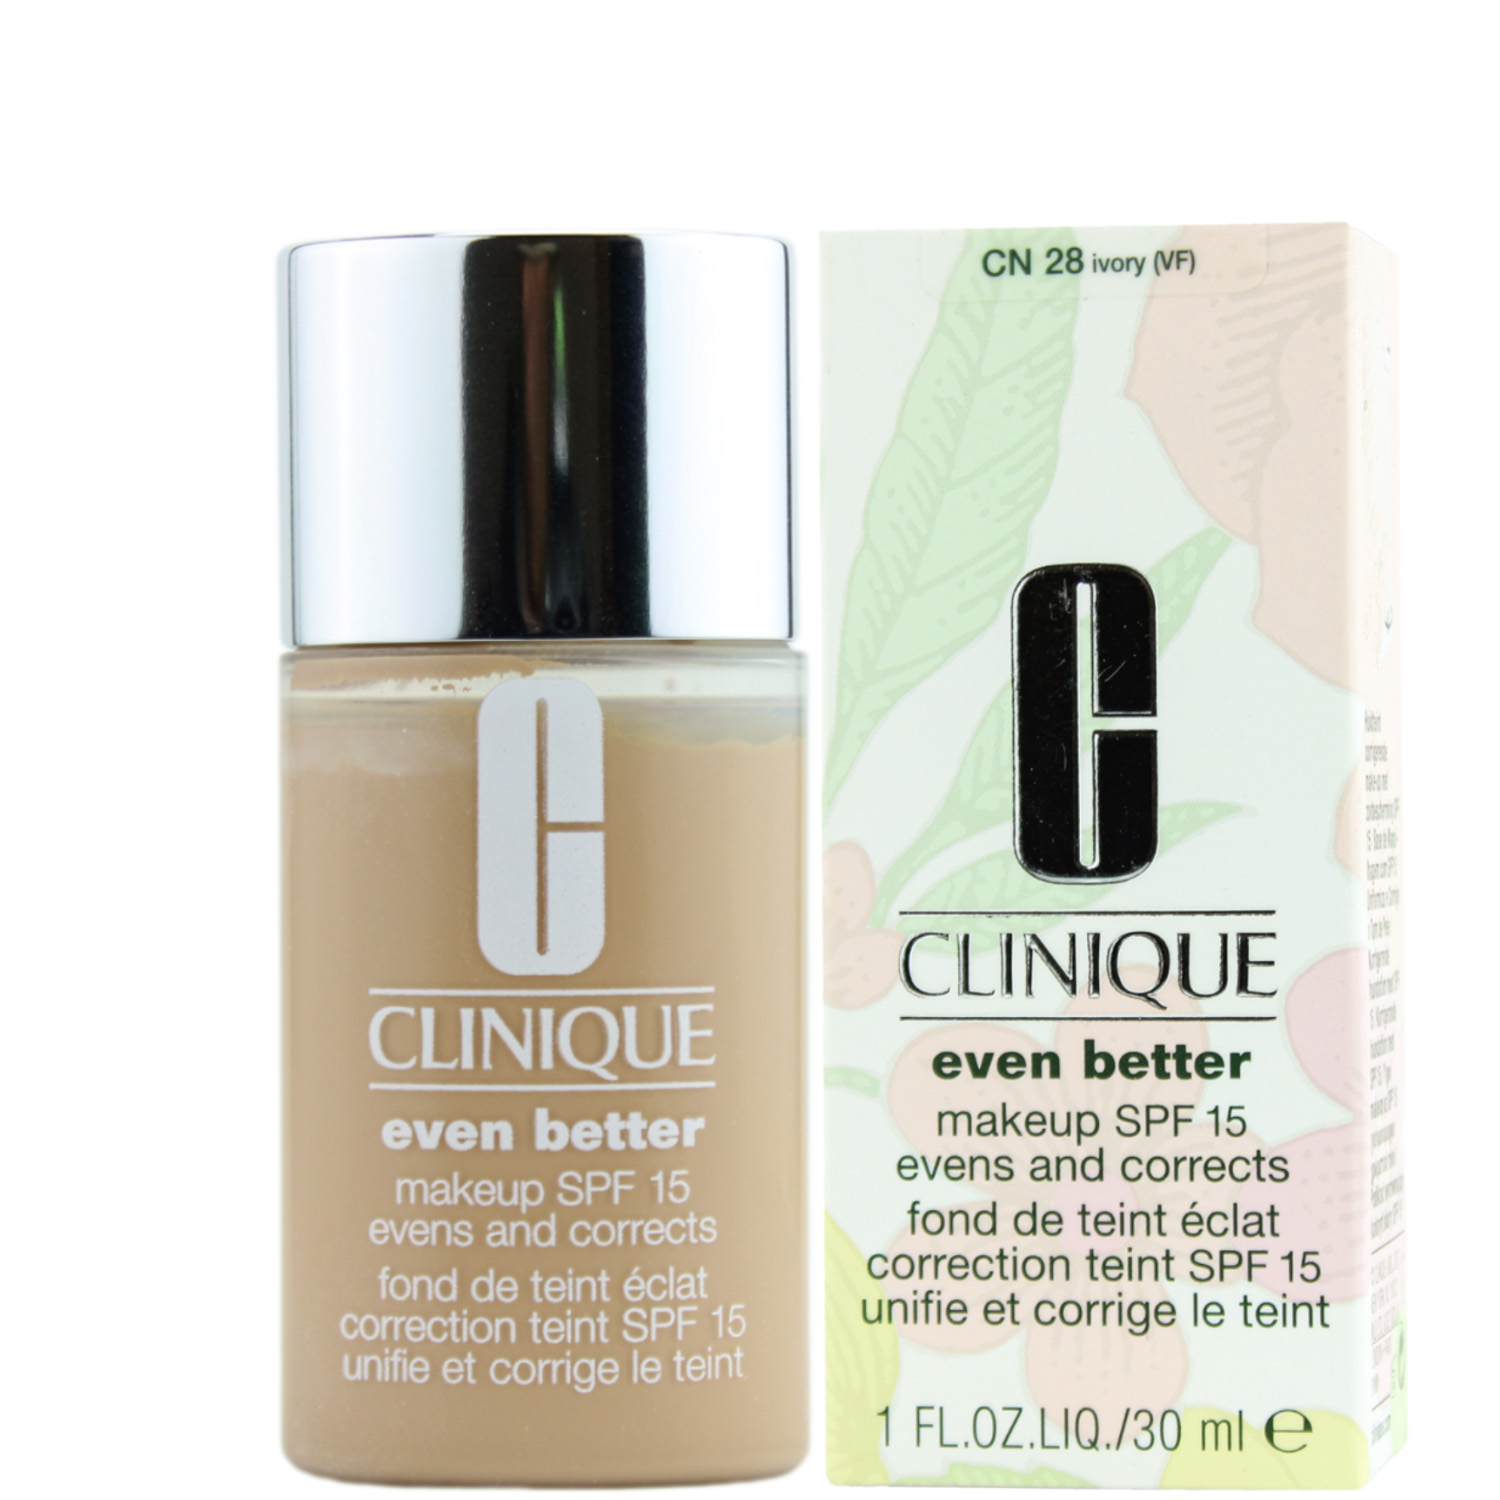 Clinique Even Better Make-Up SPF15 Foundation CN 28 Ivory (VF) 30ml